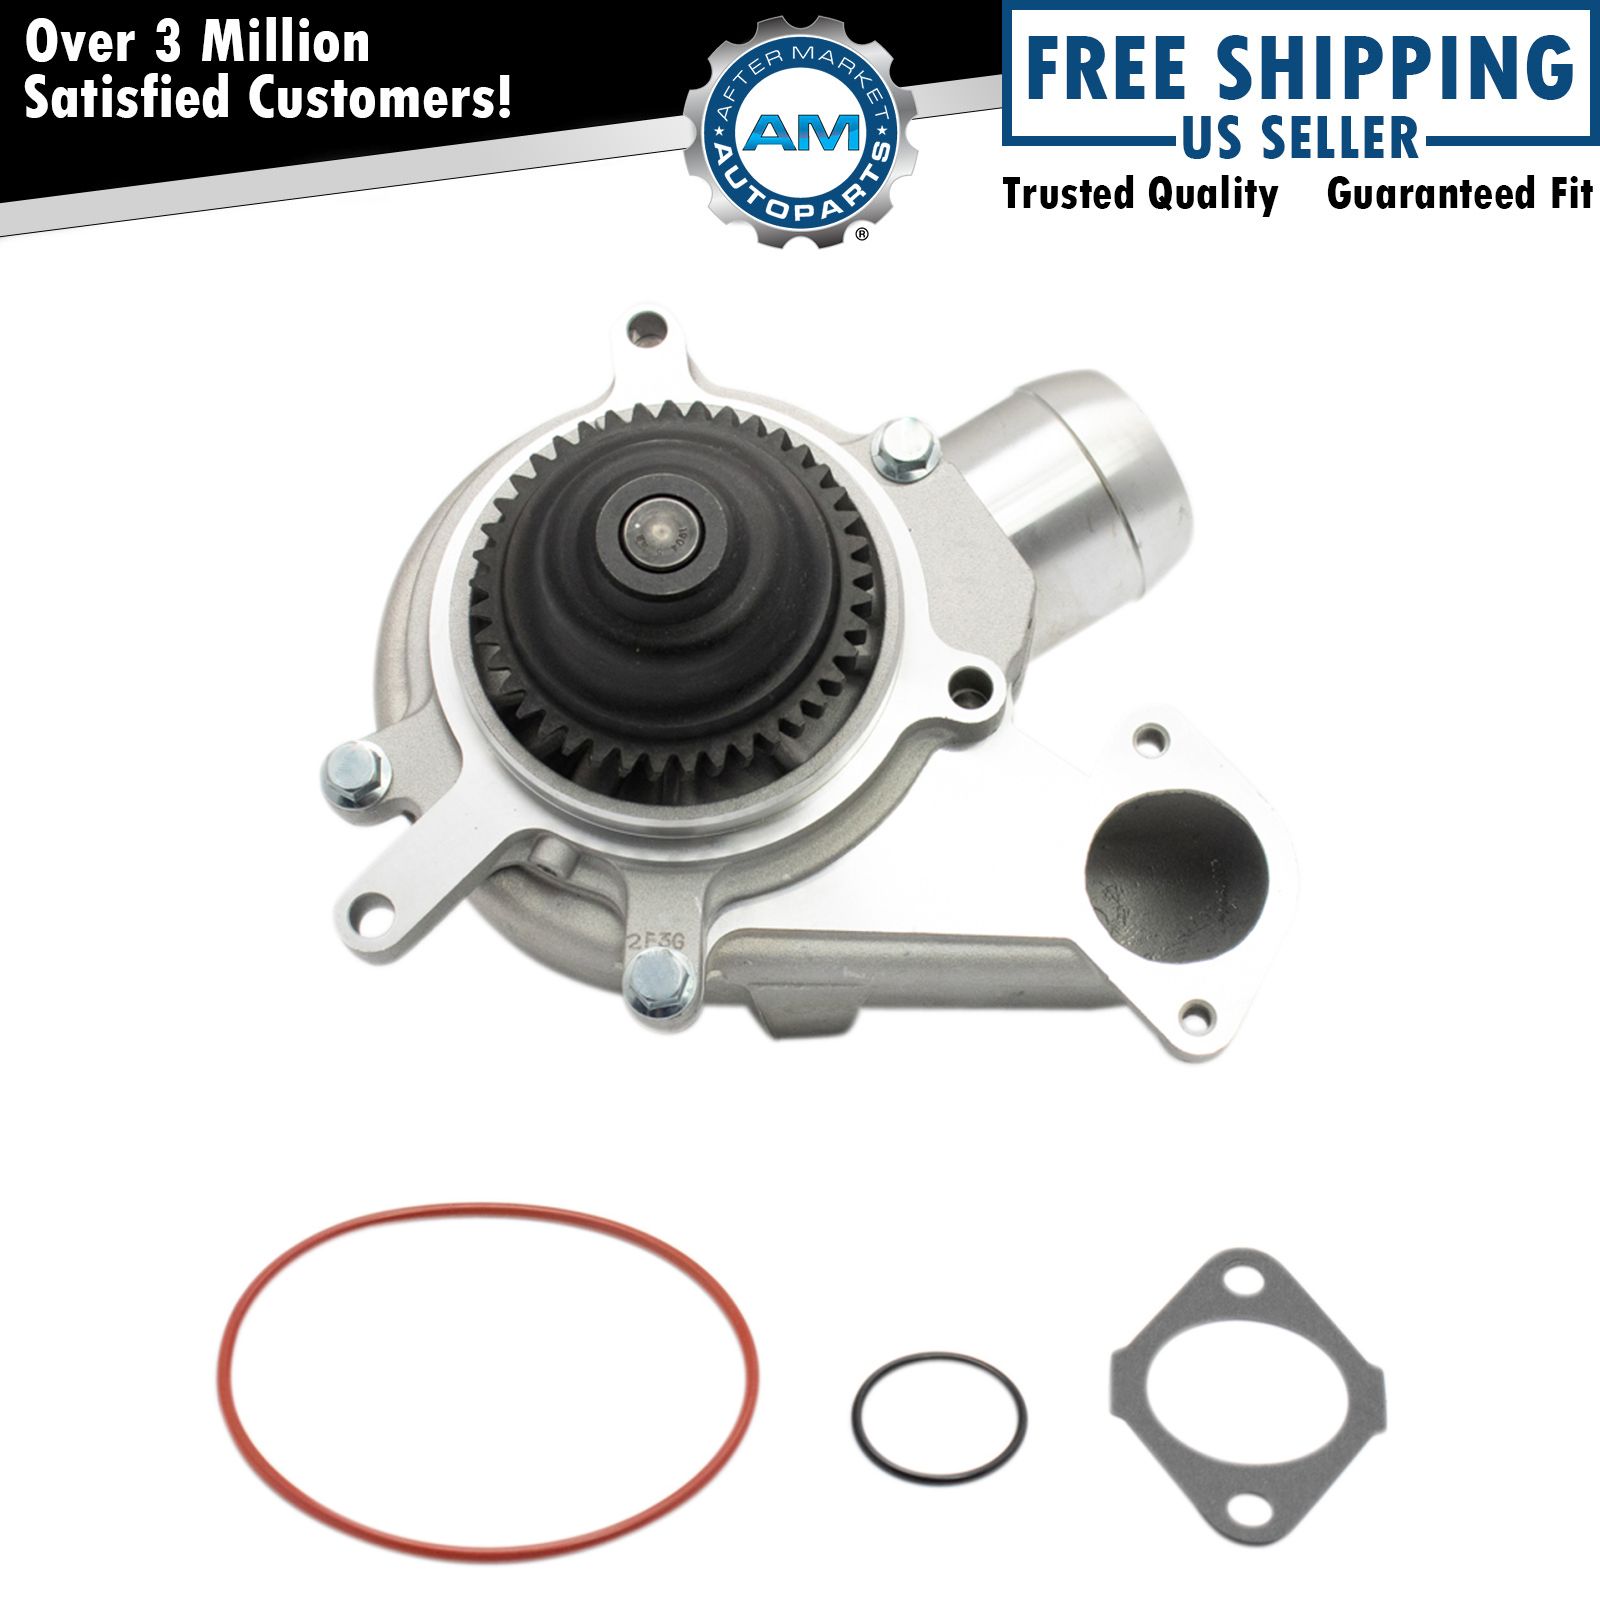 Engine Coolant Water Pump Direct Fit for Chevy GMC Hummer 6.6L Diesel